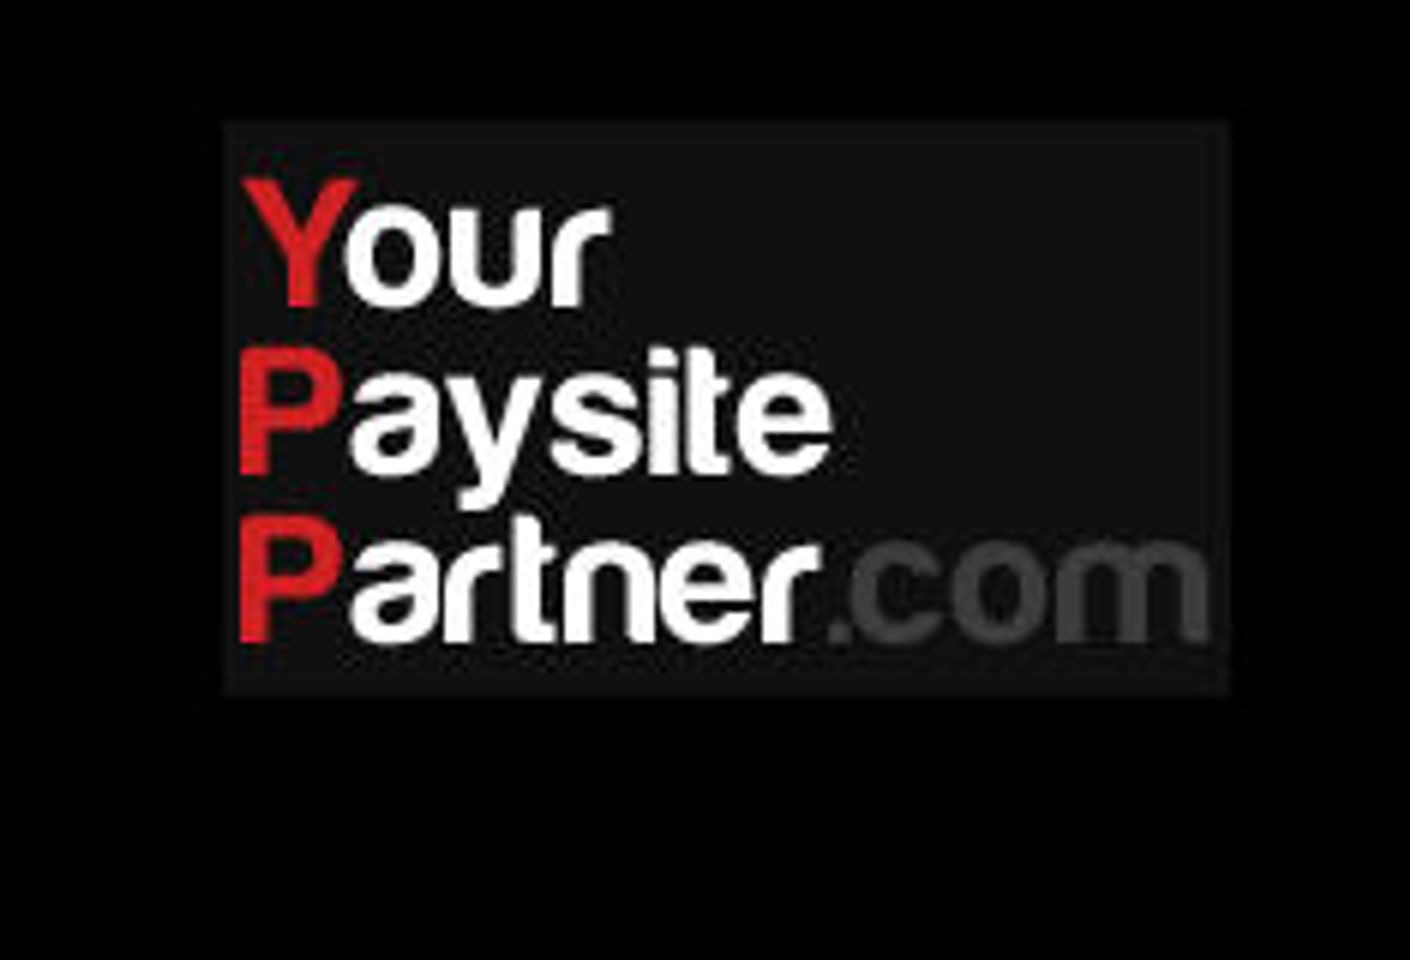 Your Paysite Partner Adds My Boobs, We Doki to Radical Cash